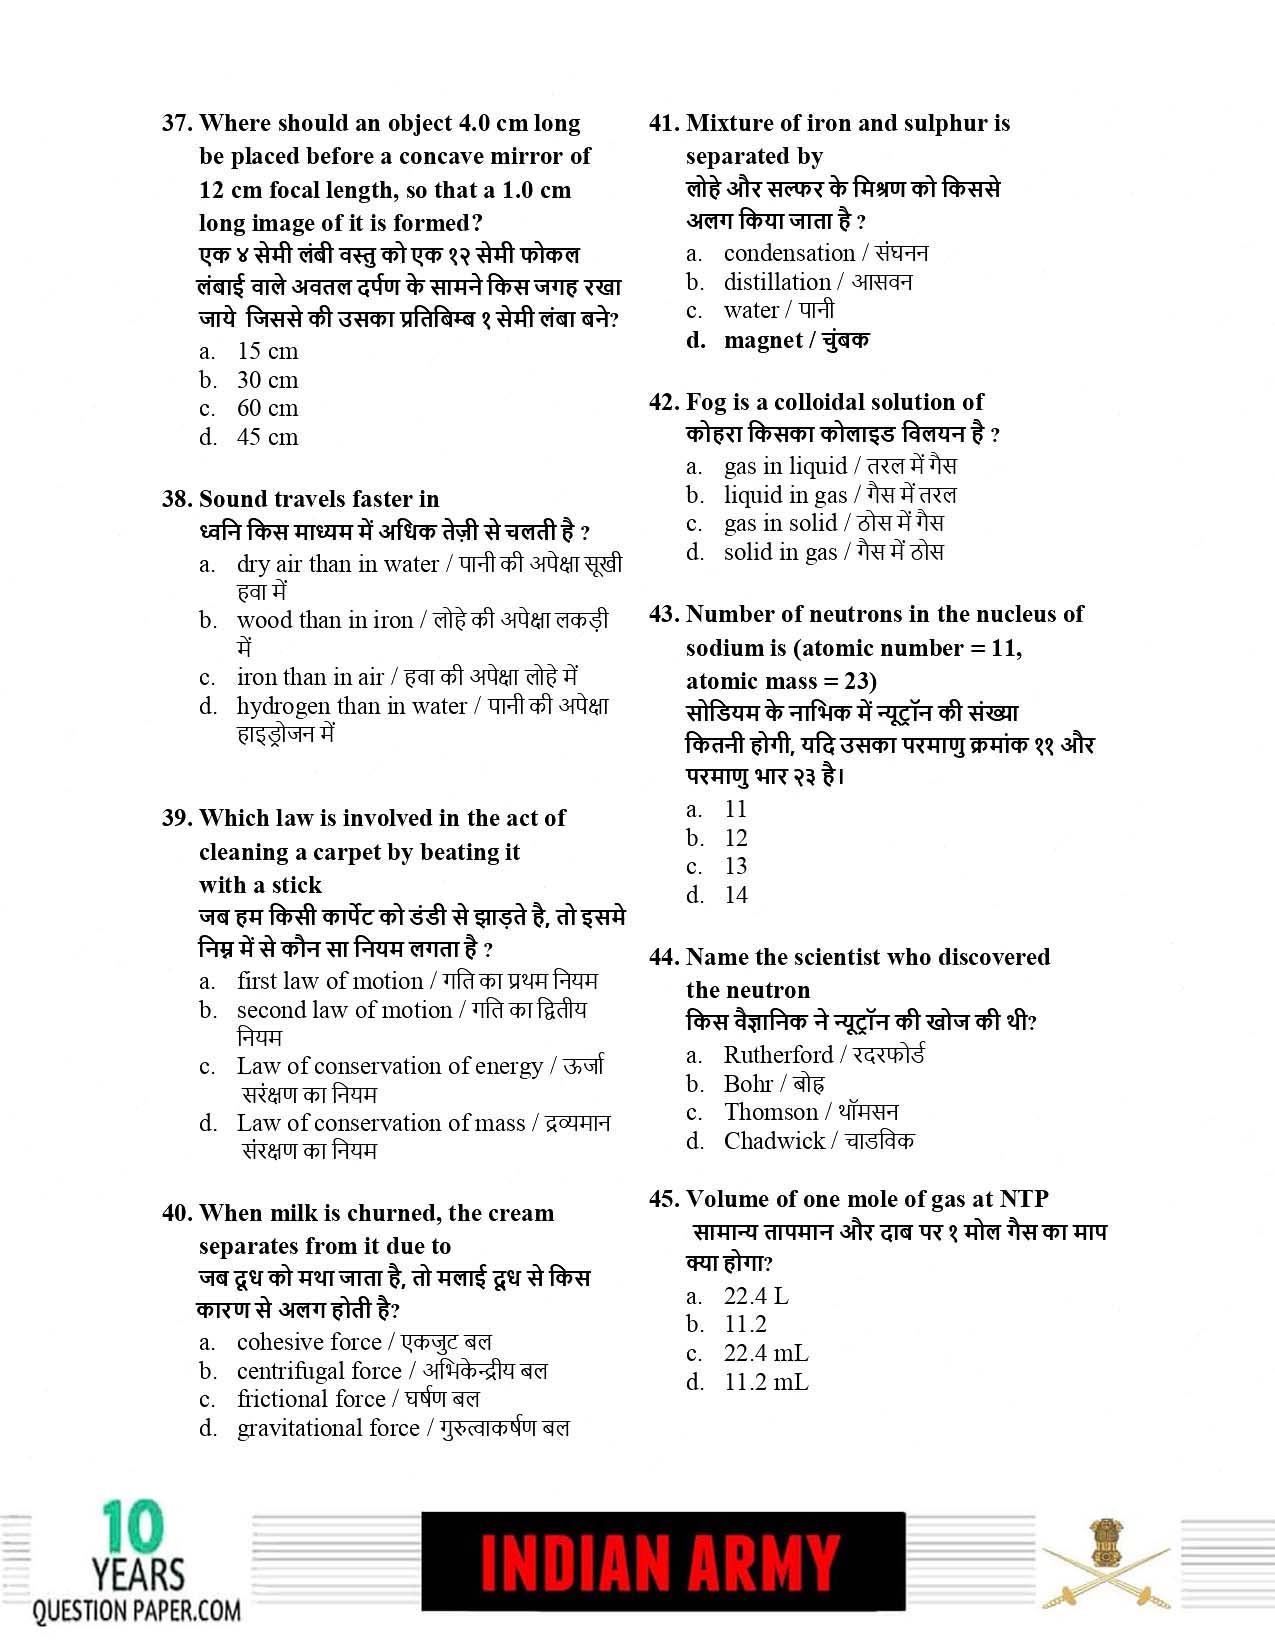 Indian Army Technical 2019 Question Paper